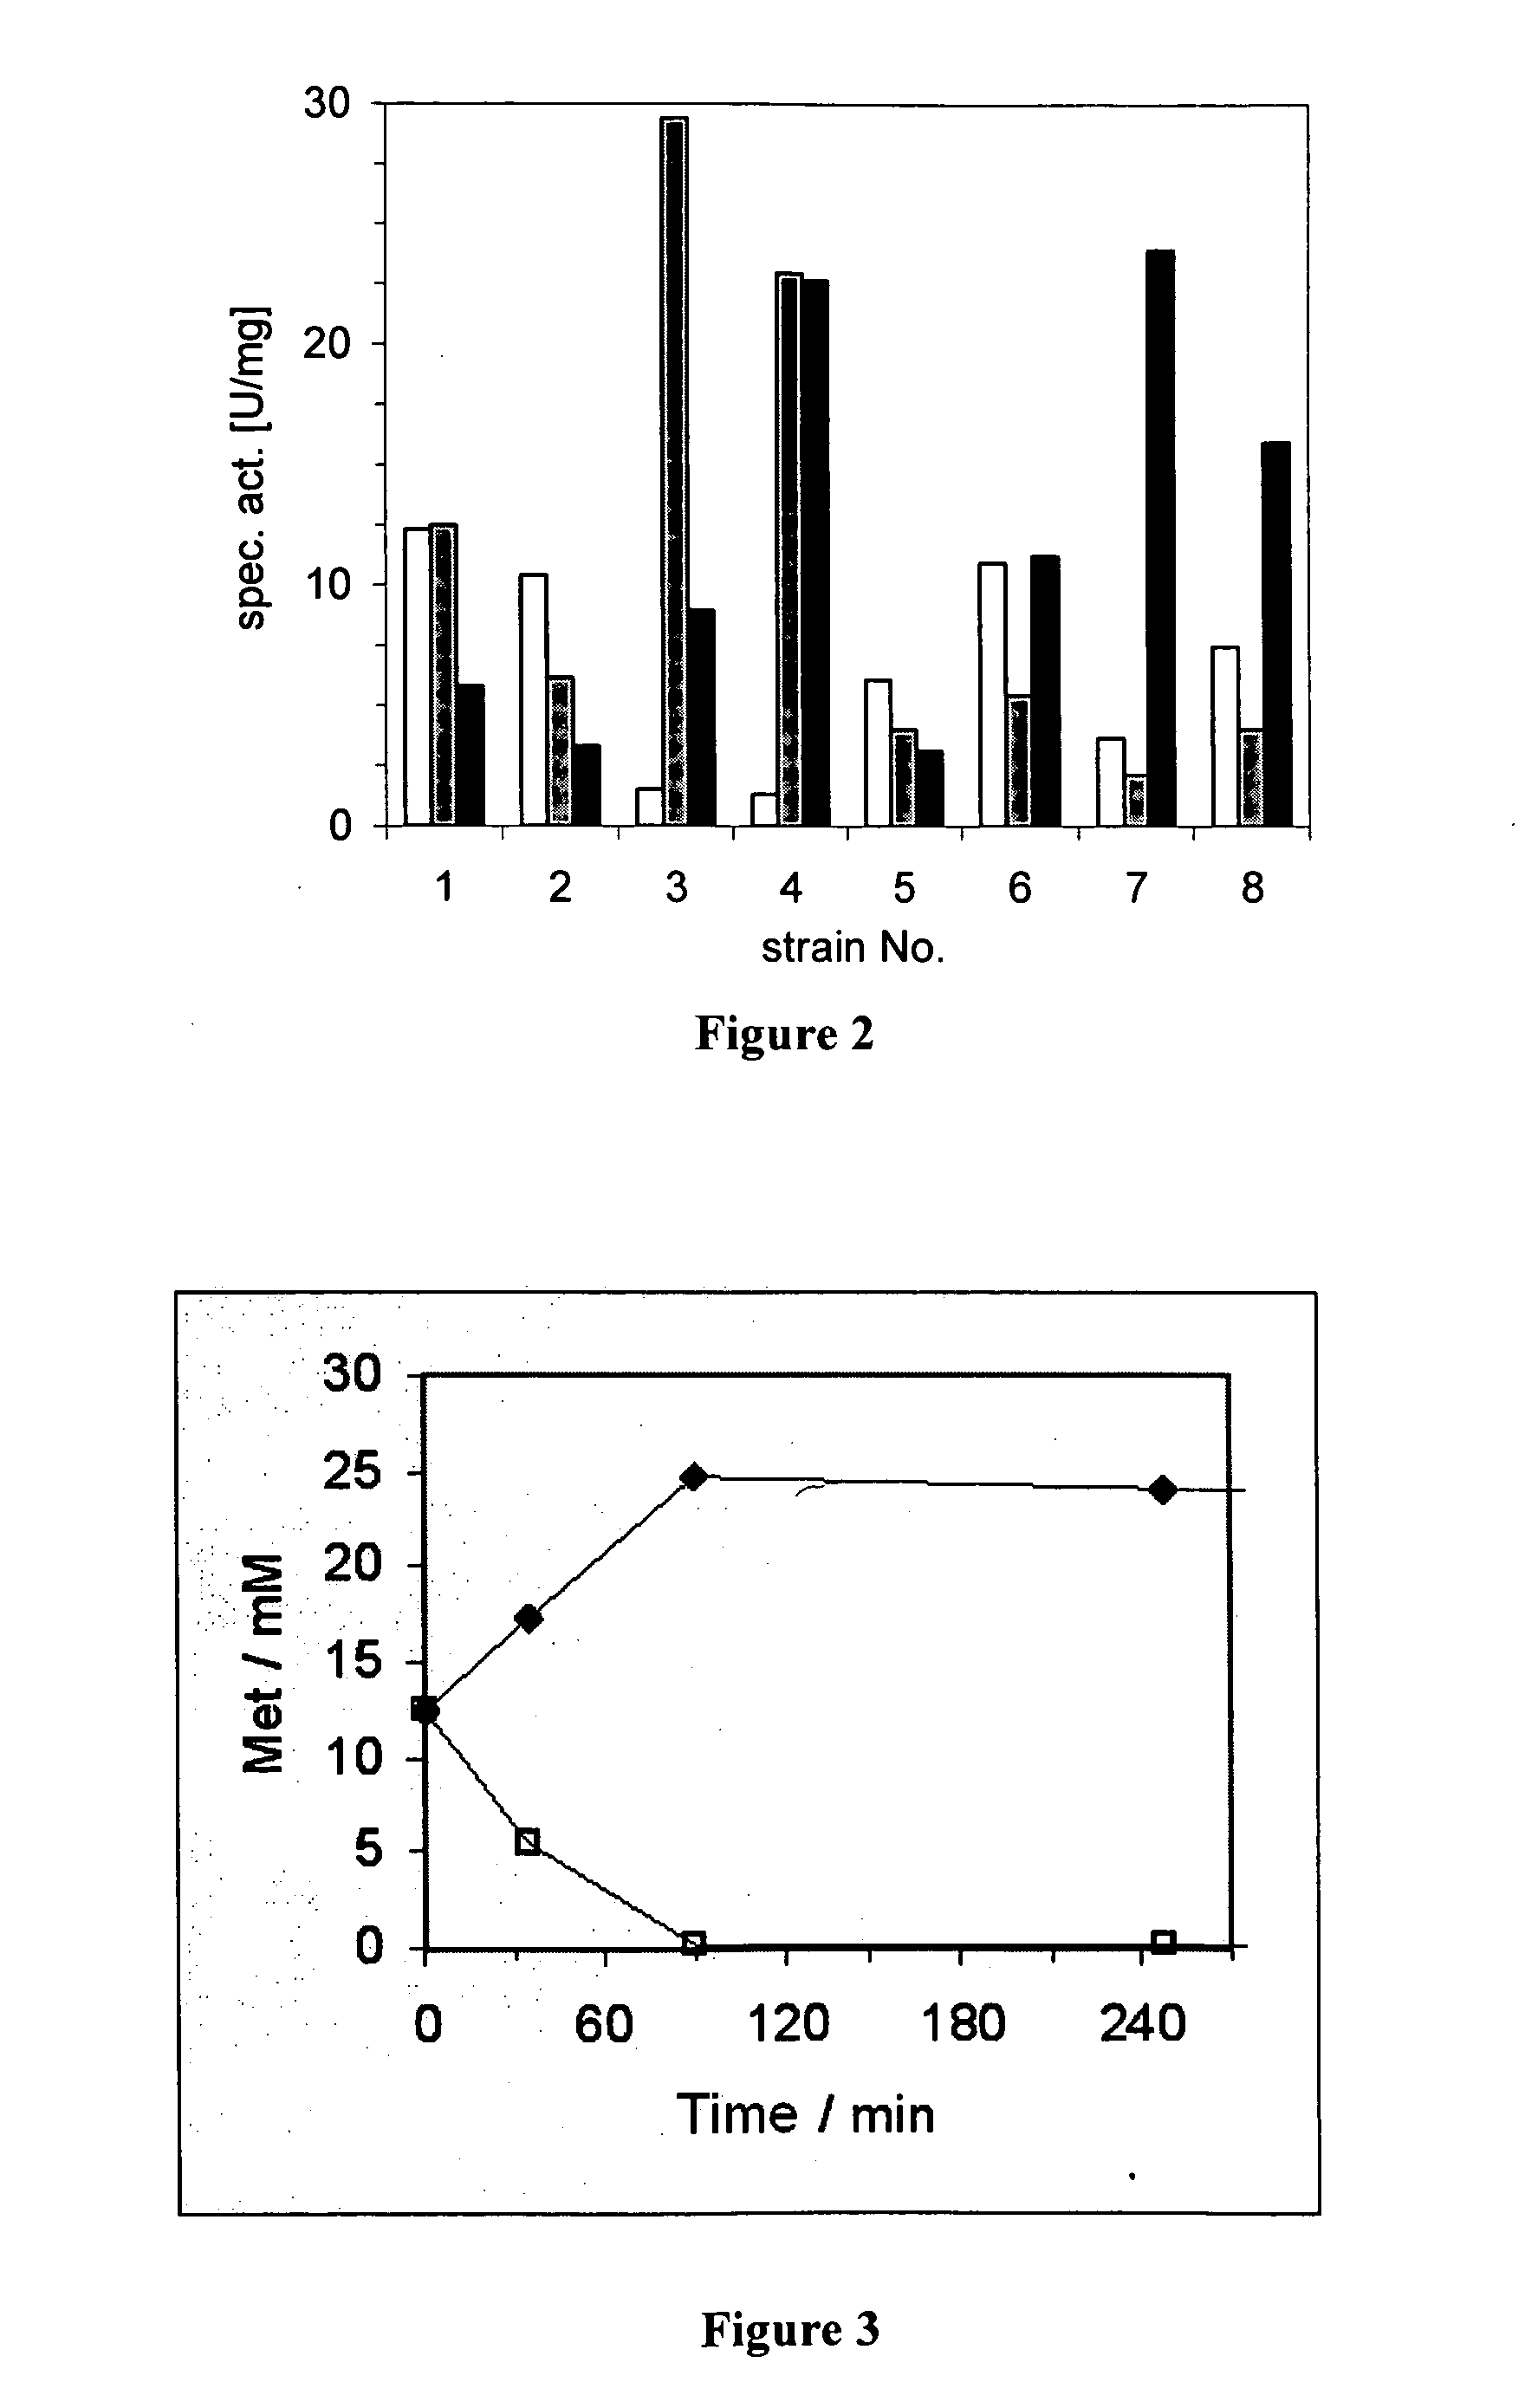 Method for the preparation of L-amino acids from D-amino acids